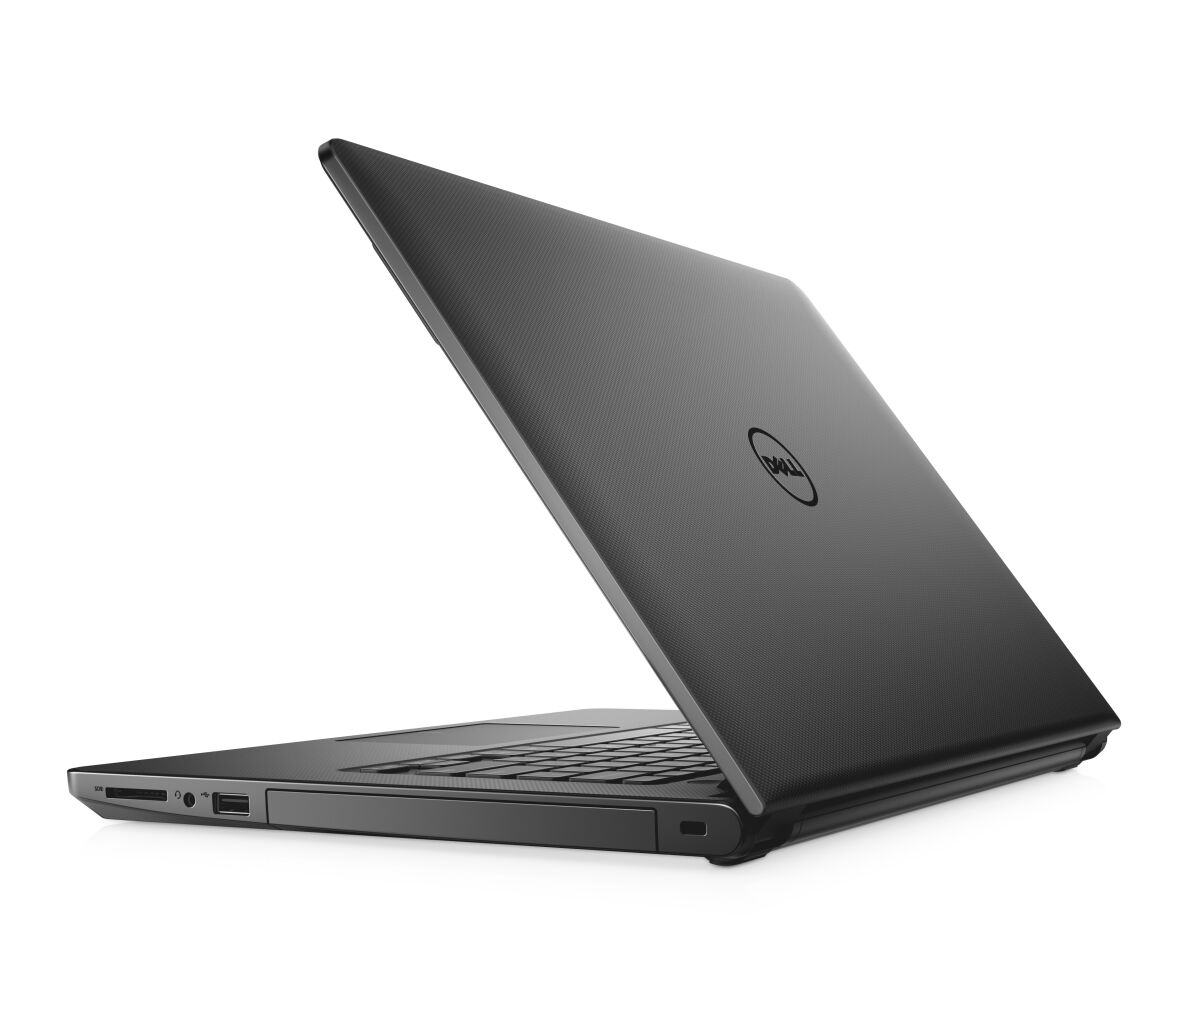 DELL Inspiron 3467 - INS-3467-00001-BLK laptop specifications